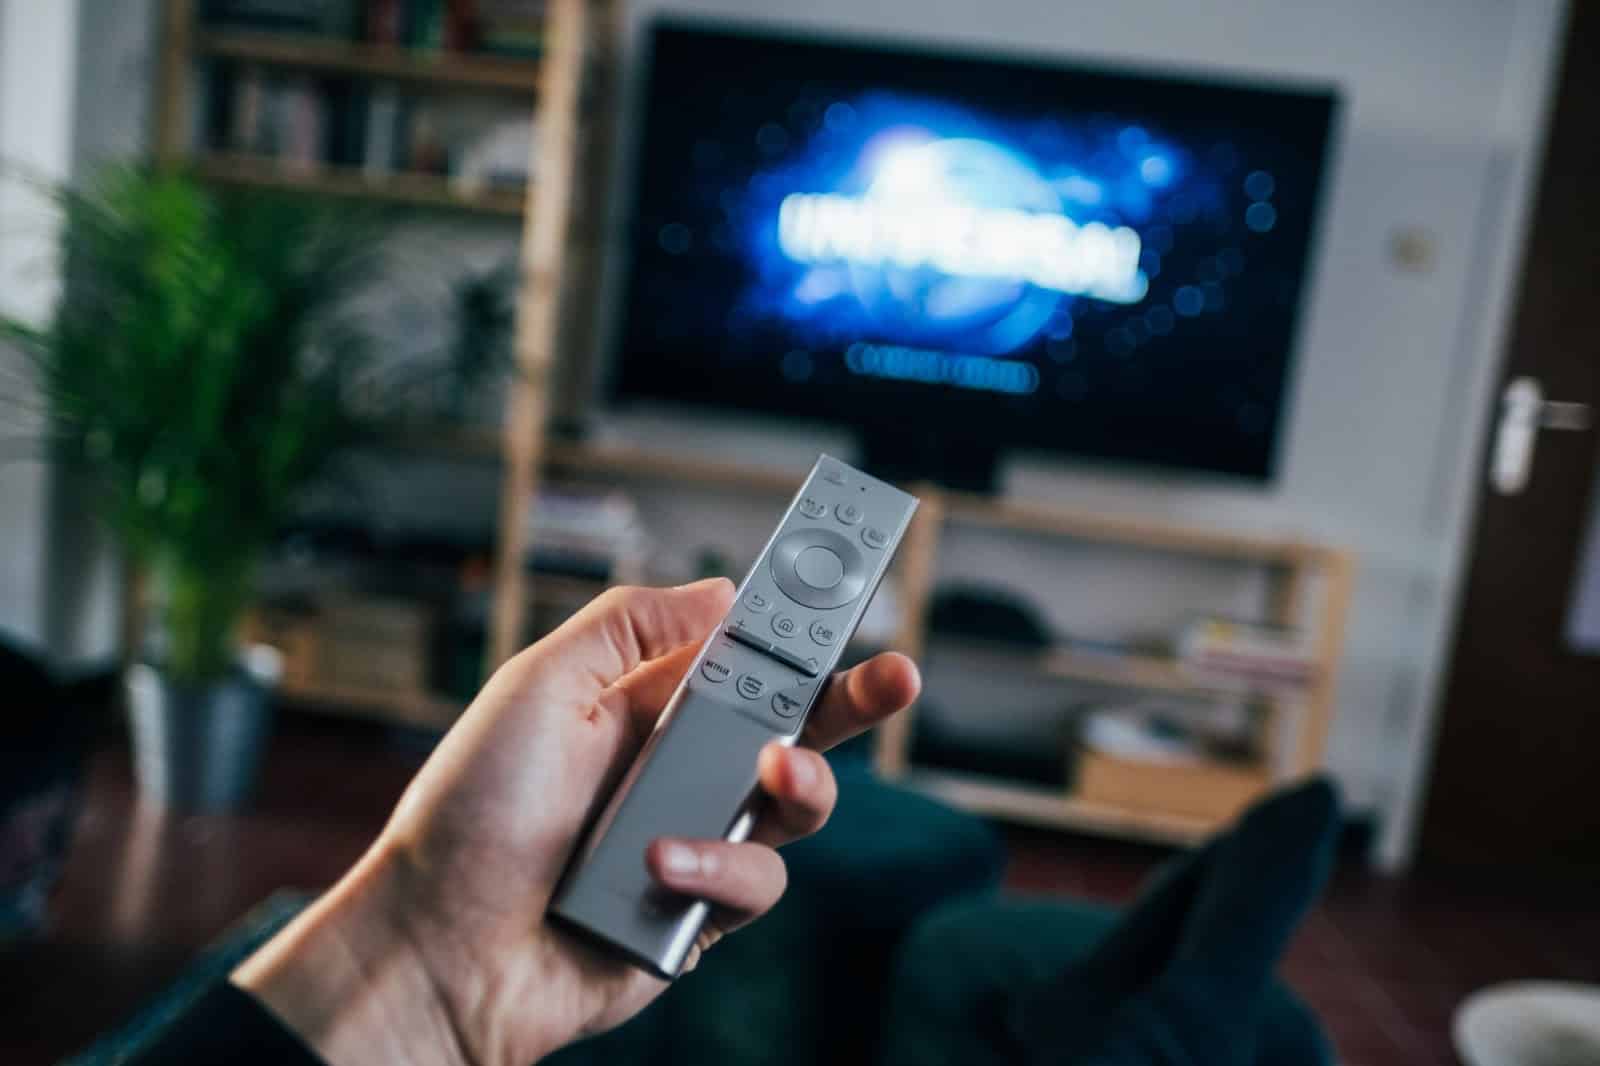 a hand holding a remote for the tv in the background